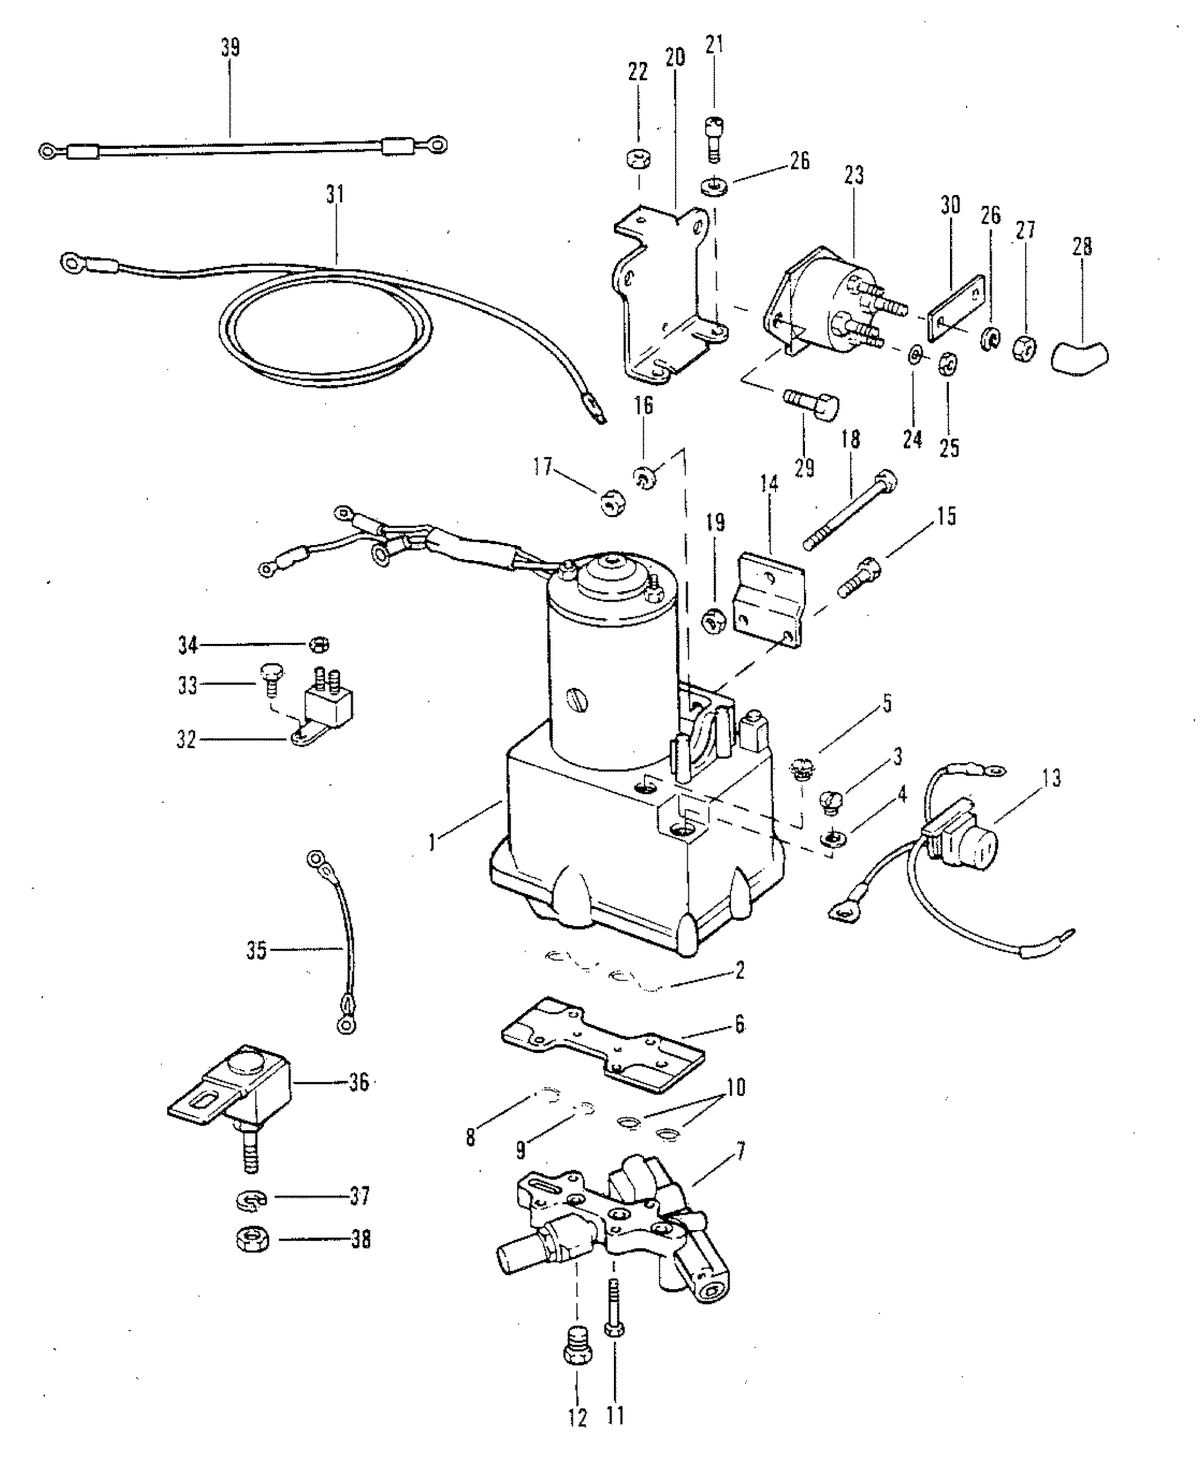 MERCURY MERC 115 POWER TRIM COMPONENTS (WITH CIRCUIT BREAKER AND FUSE)